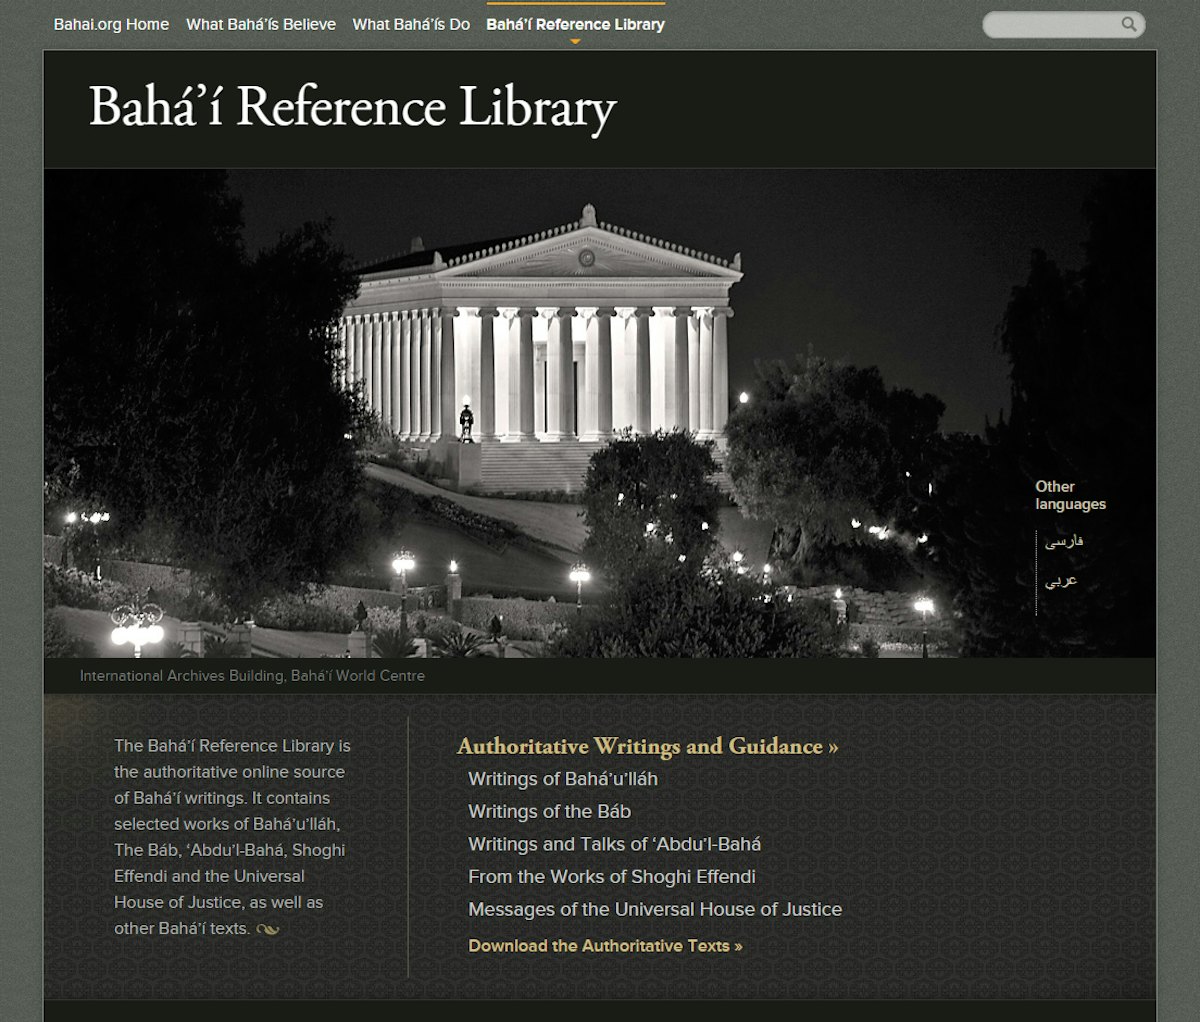 The landing page for the Baha'i Reference Library on the new Bahai.org website.